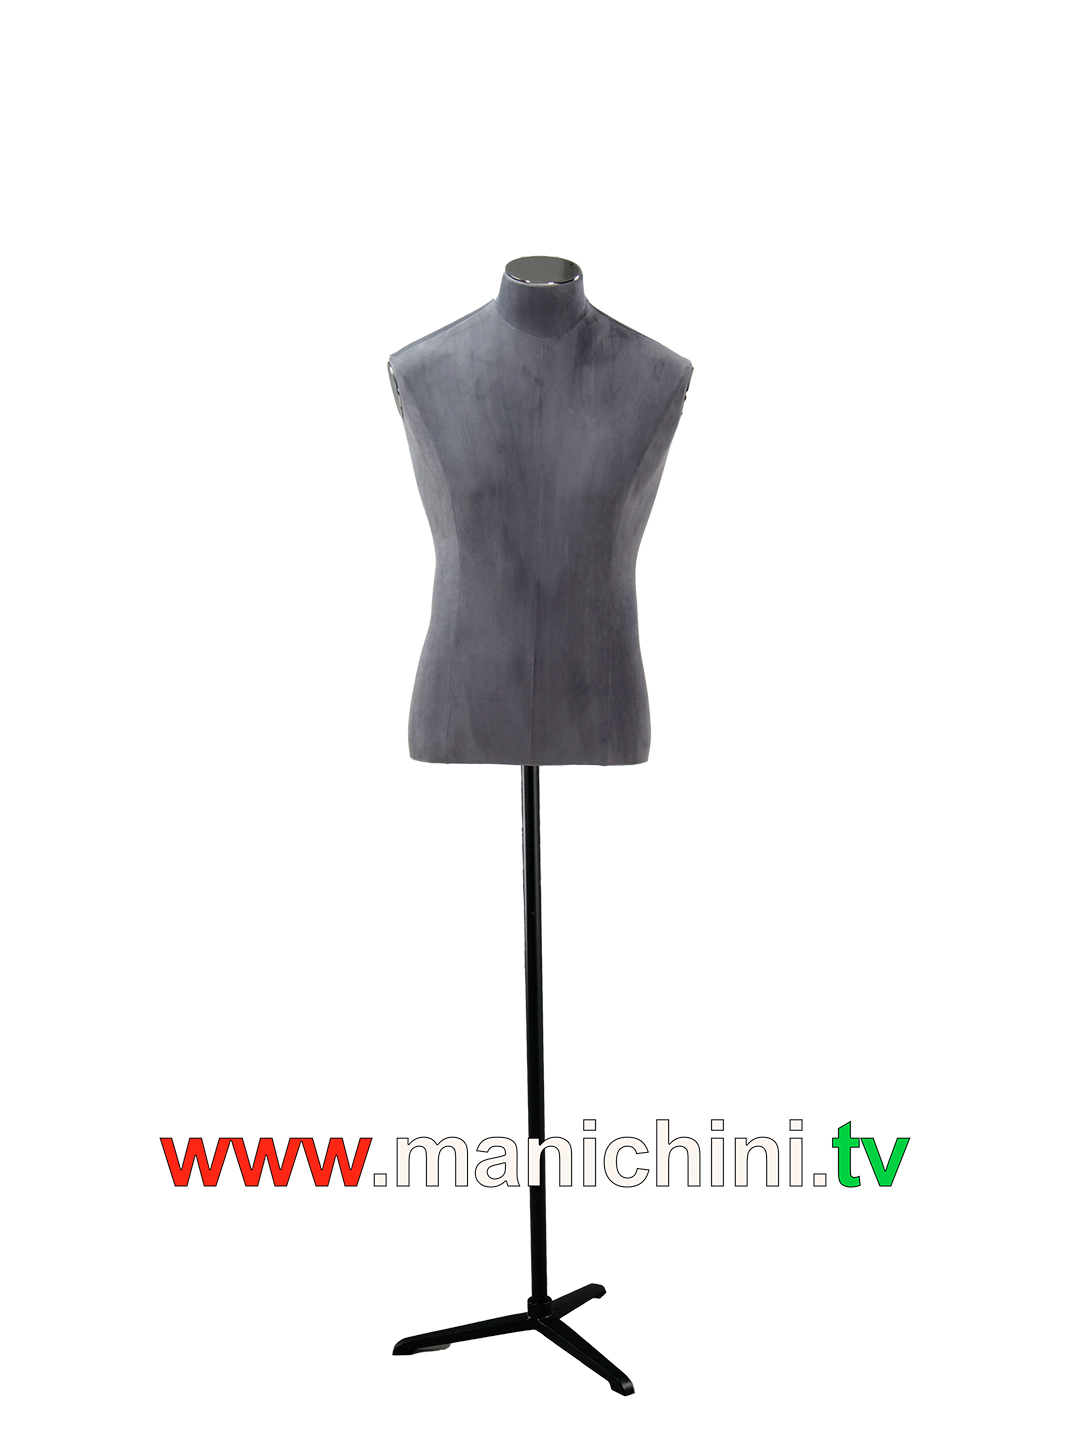 Velvet upholstered busts Dark grey tailored woman bust in wood